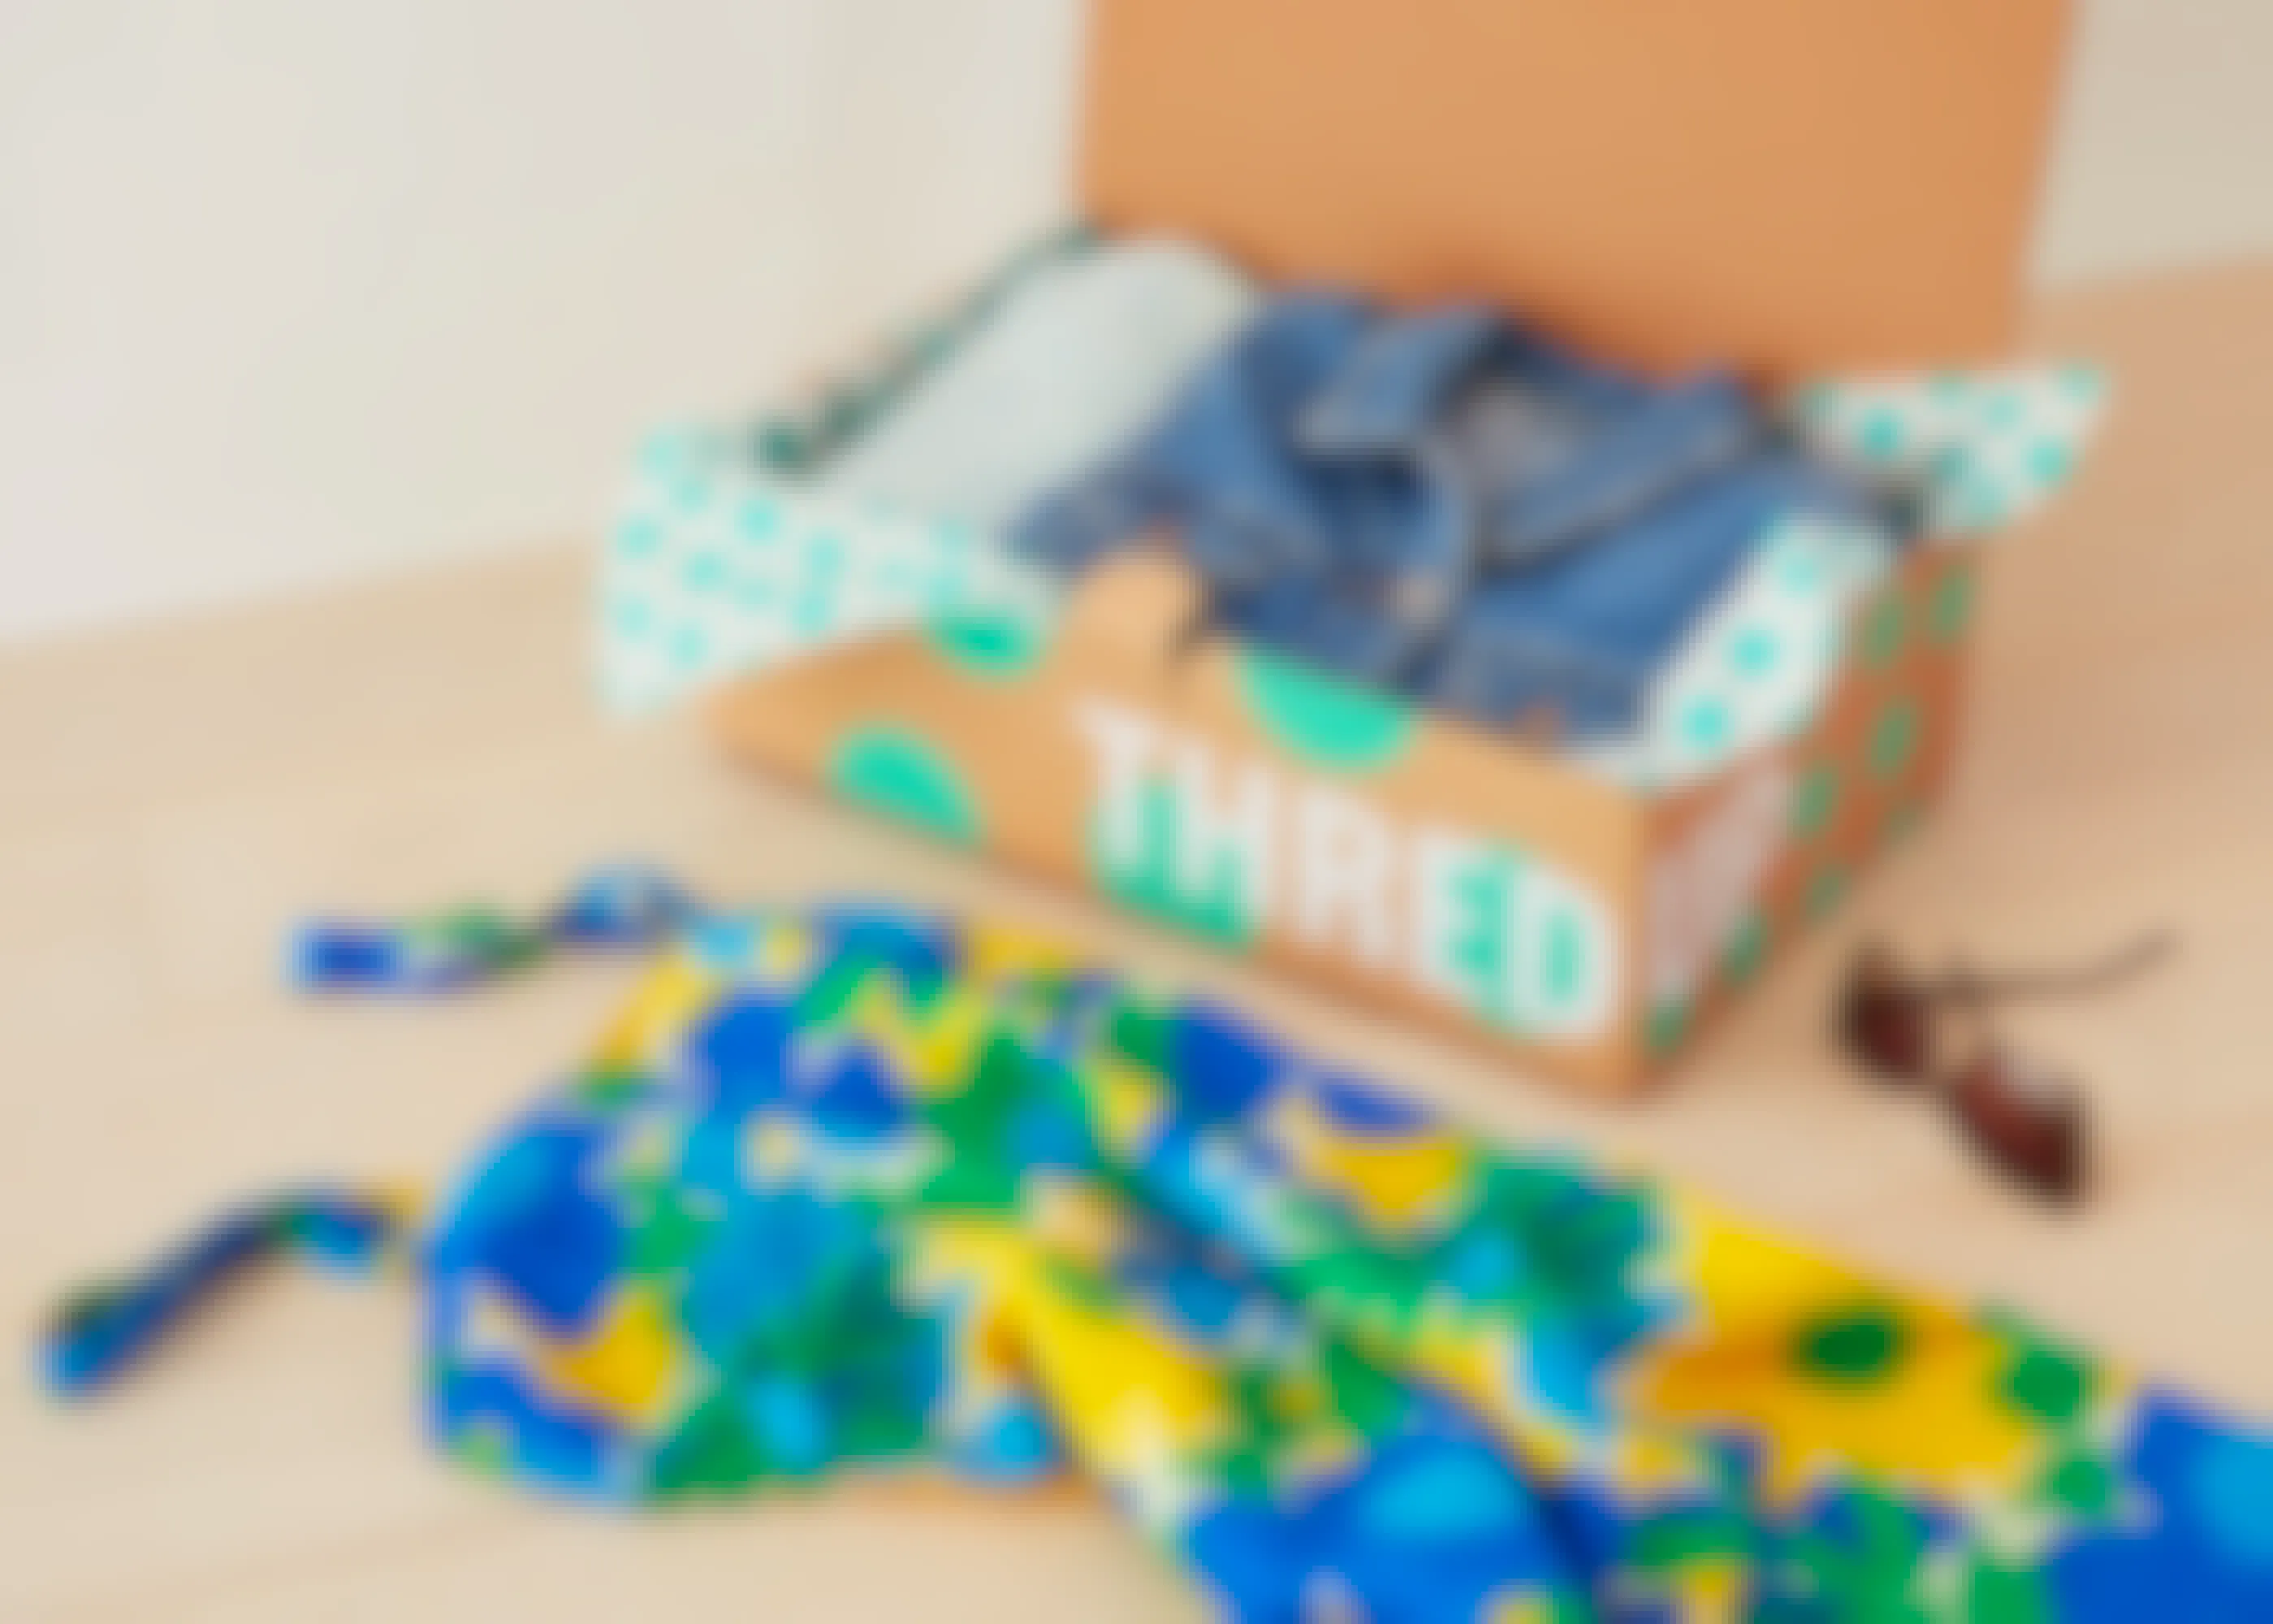 A ThredUp box with a denim jacket inside and some sunglasses and a dress on the table beside the box.